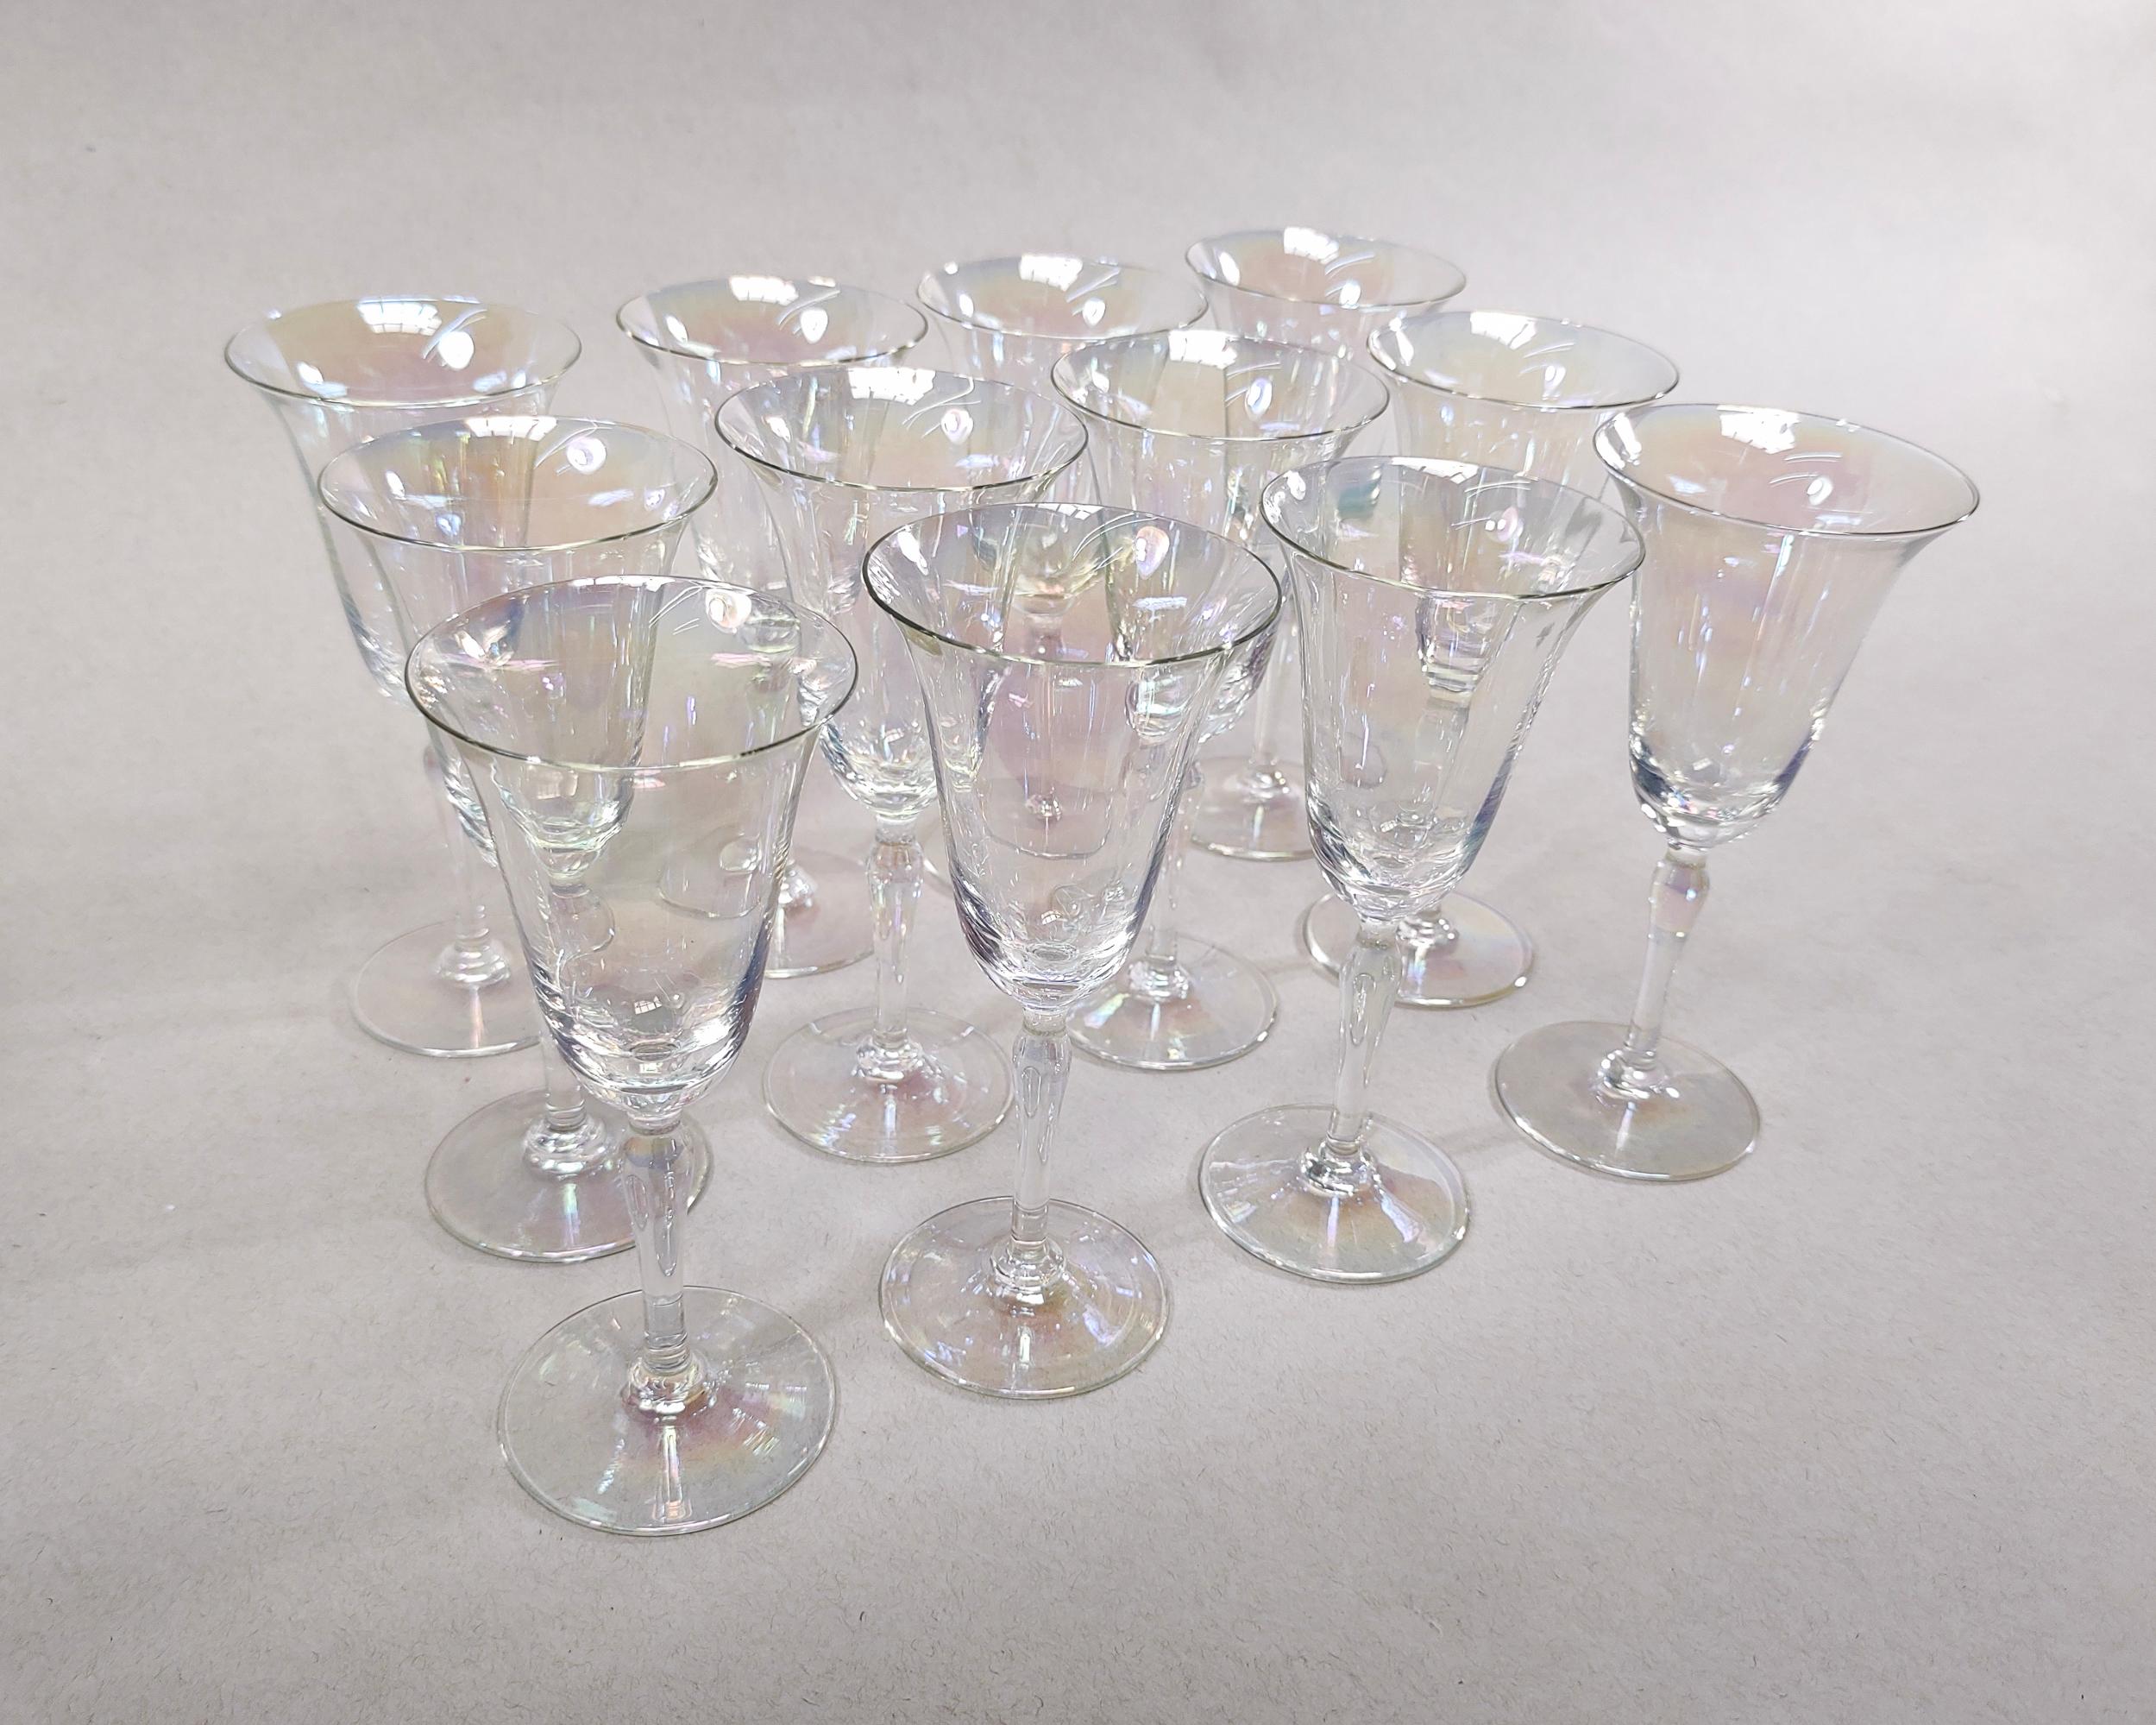 Set of 12 vintage 'Mother of Pearl' delicate iridescent tulip-shaped wine glasses by Fostoria circa 1930. Flared thin rims and hourglass shaped stems. Hand blown glass. Overall excellent condition. 

6.25